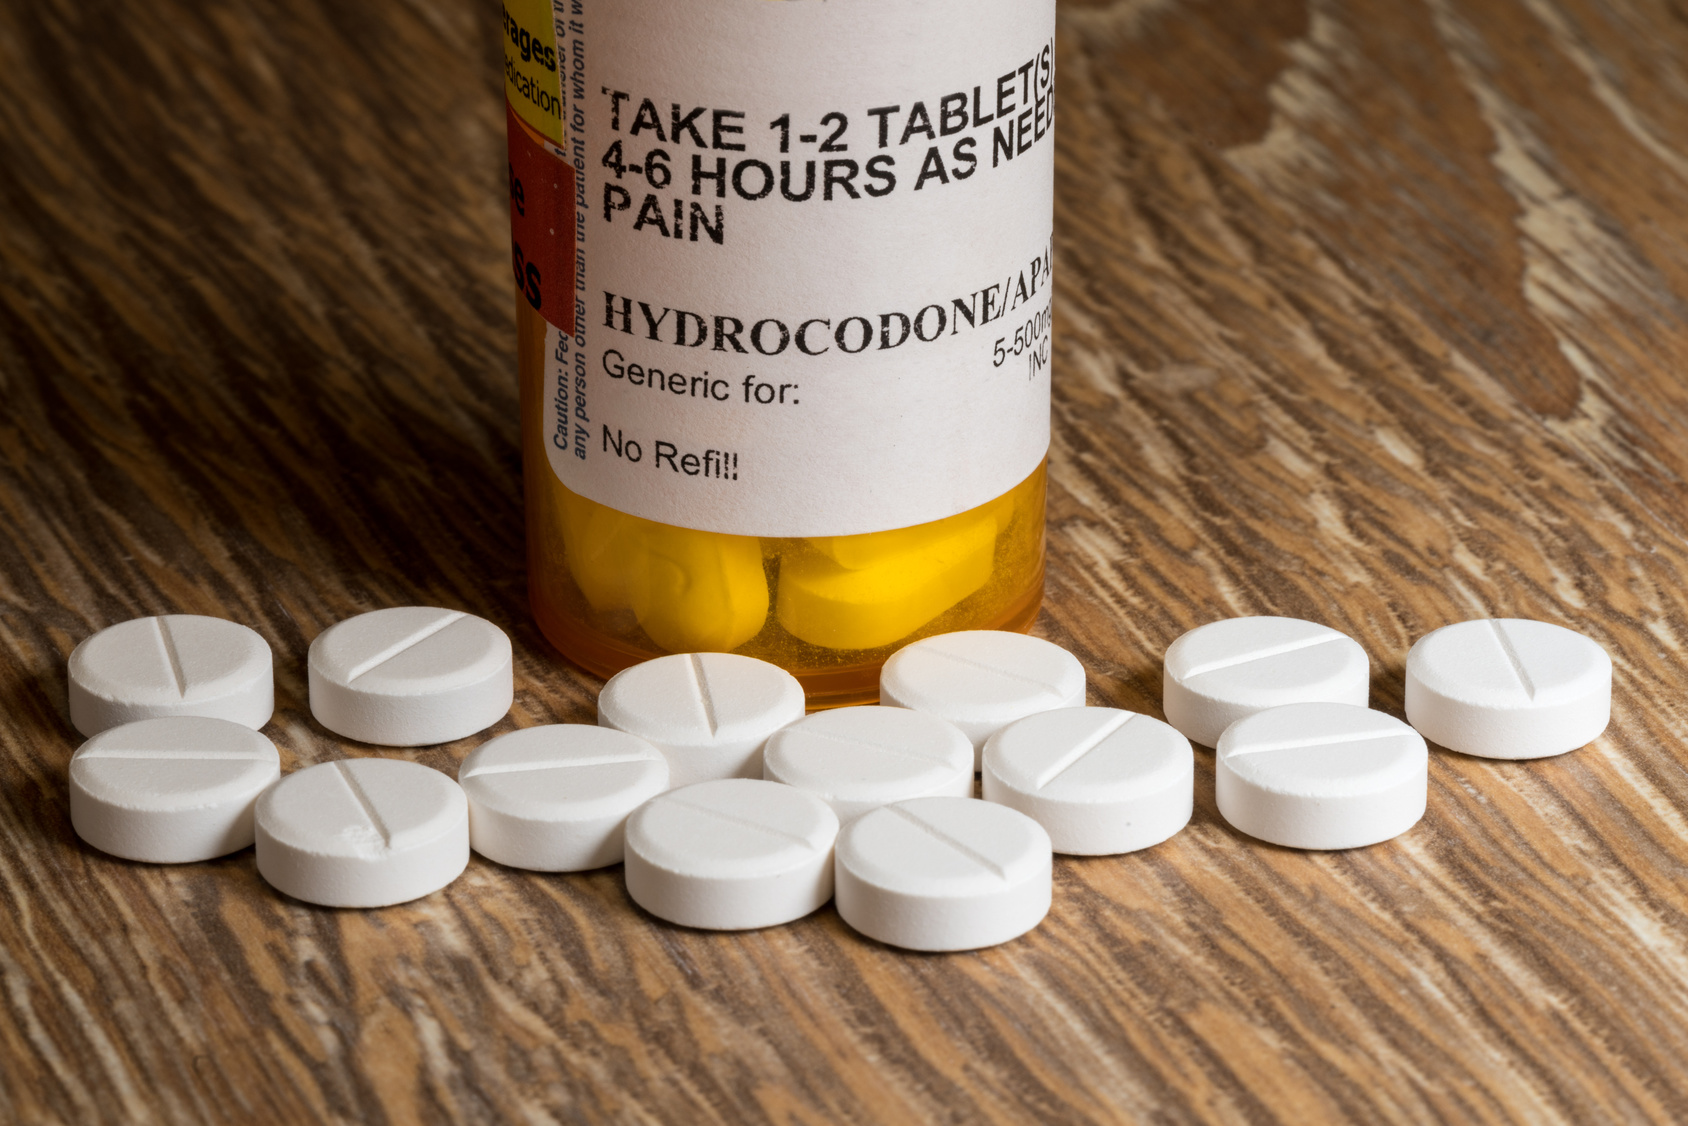 New Legislation Arms Advanced Practitioners in the Fight Against Opioids